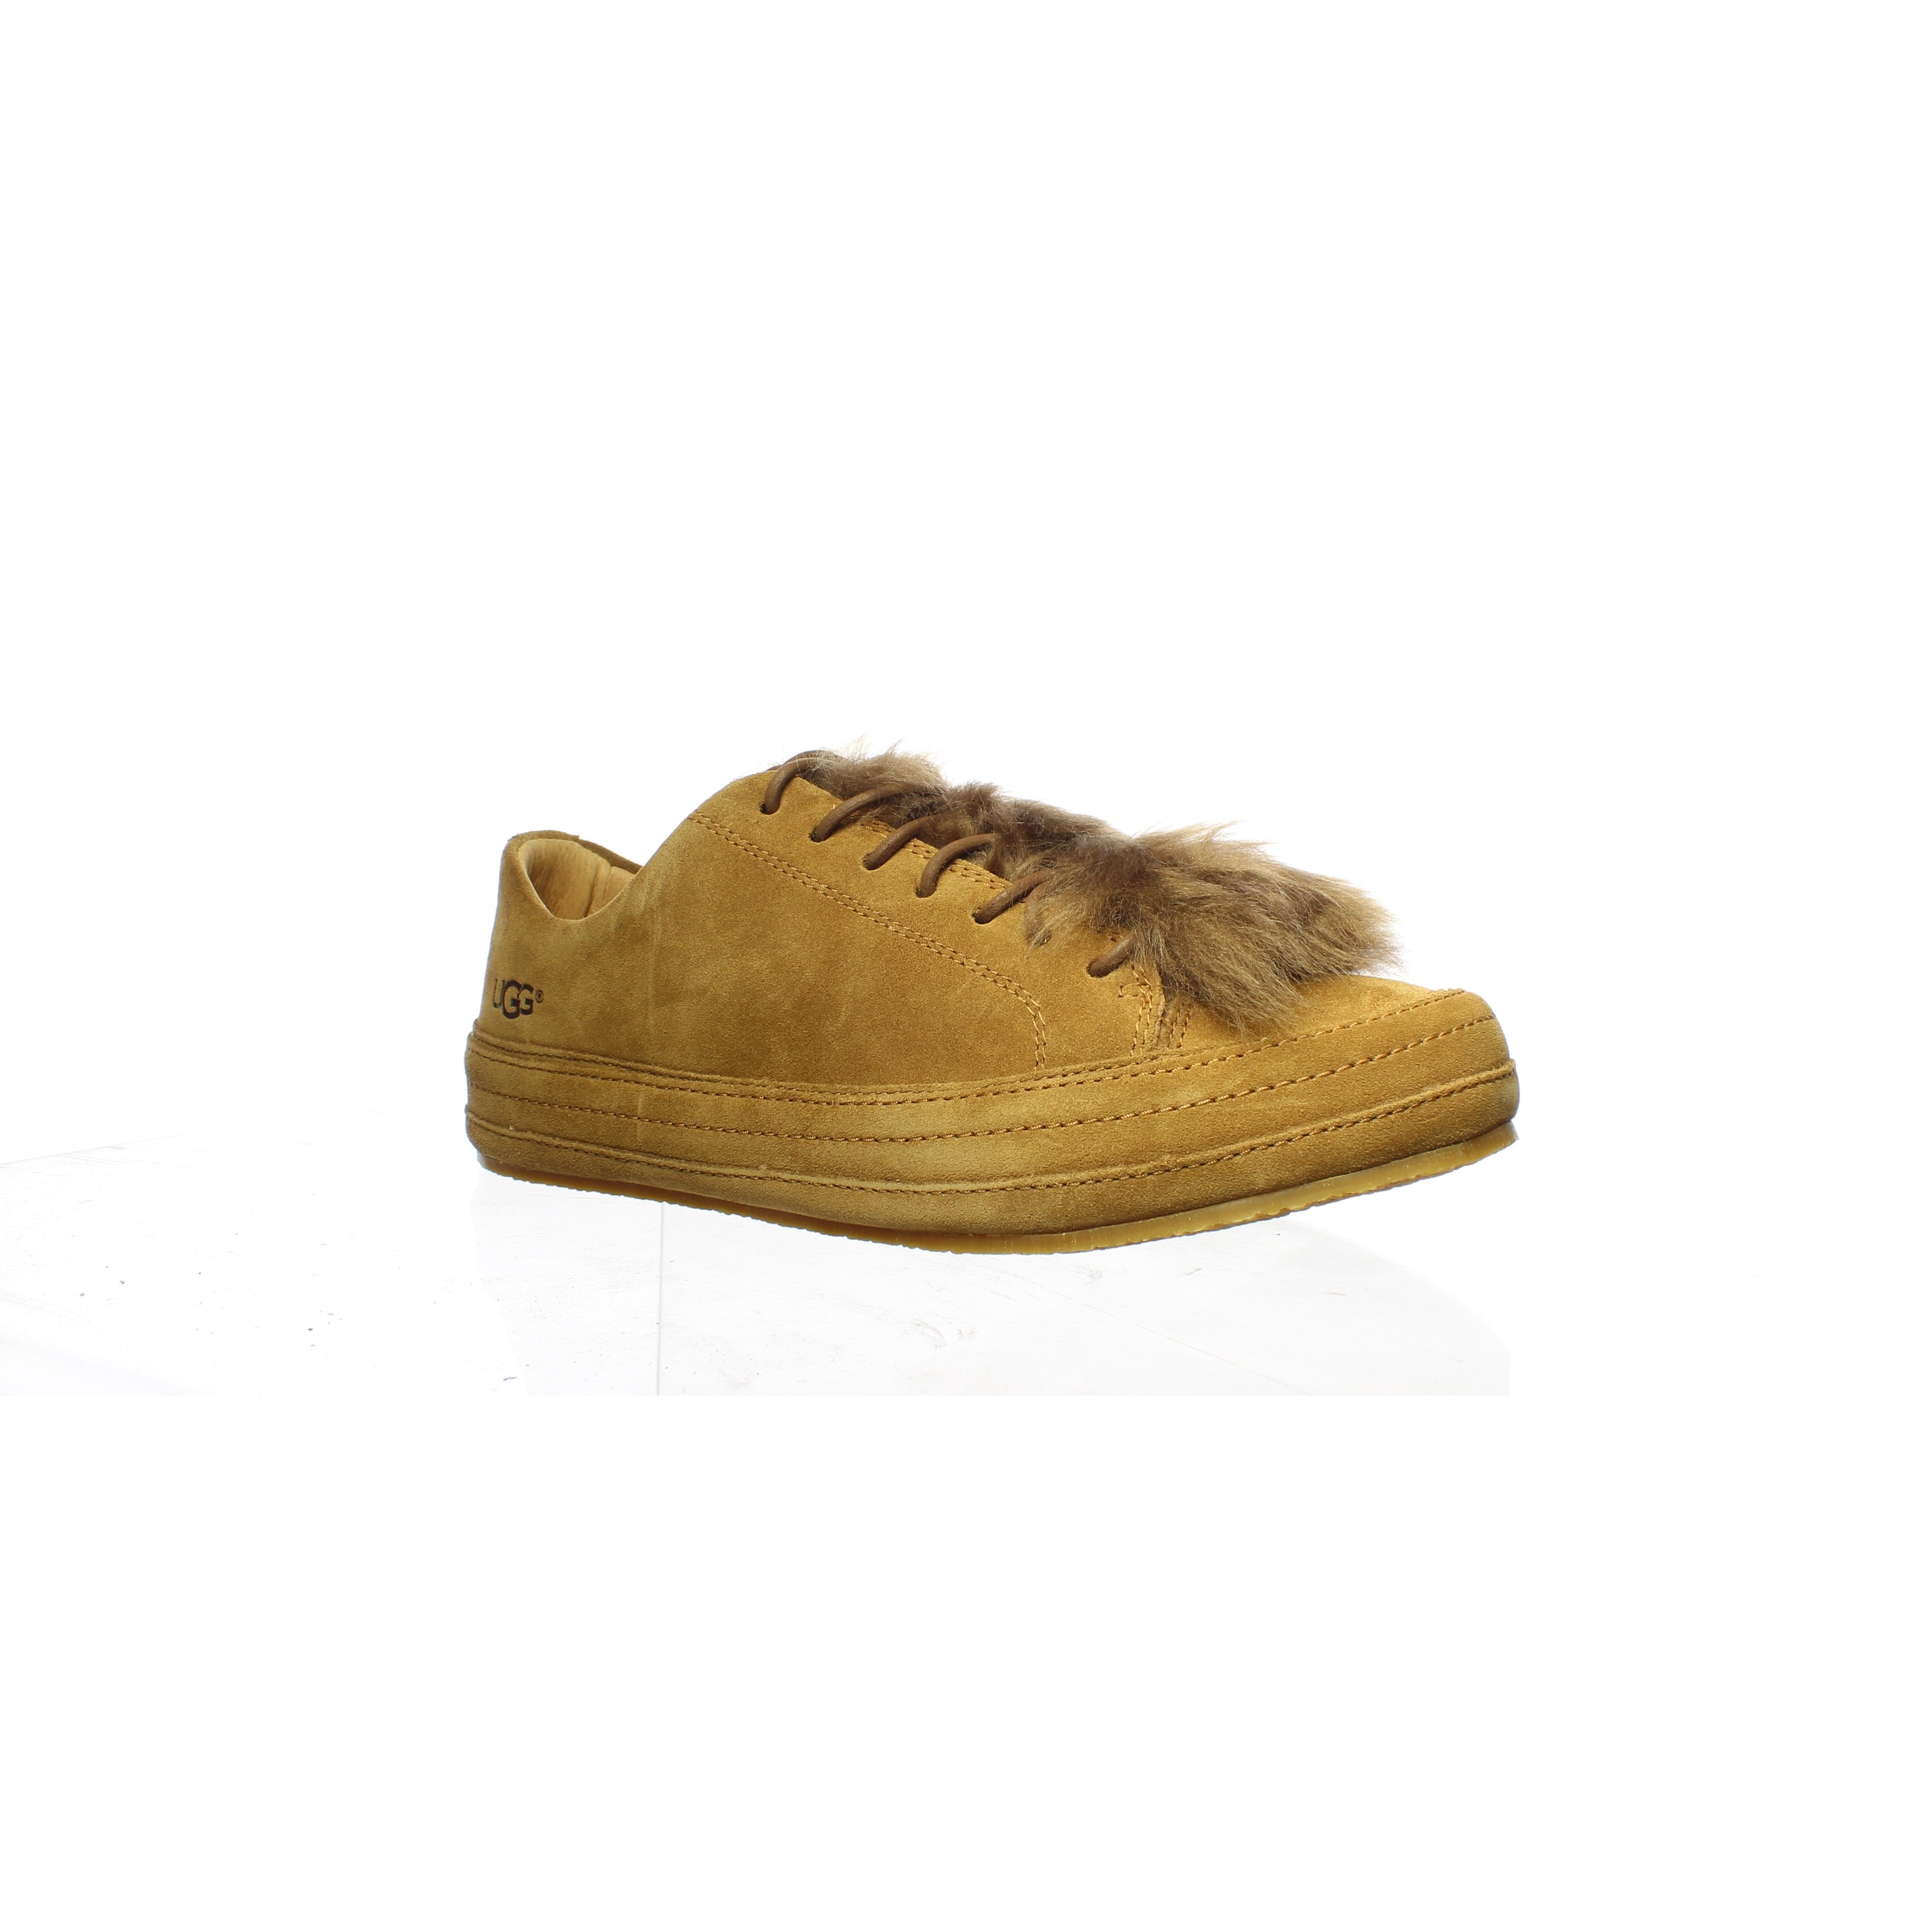 ugg sneaker with fur